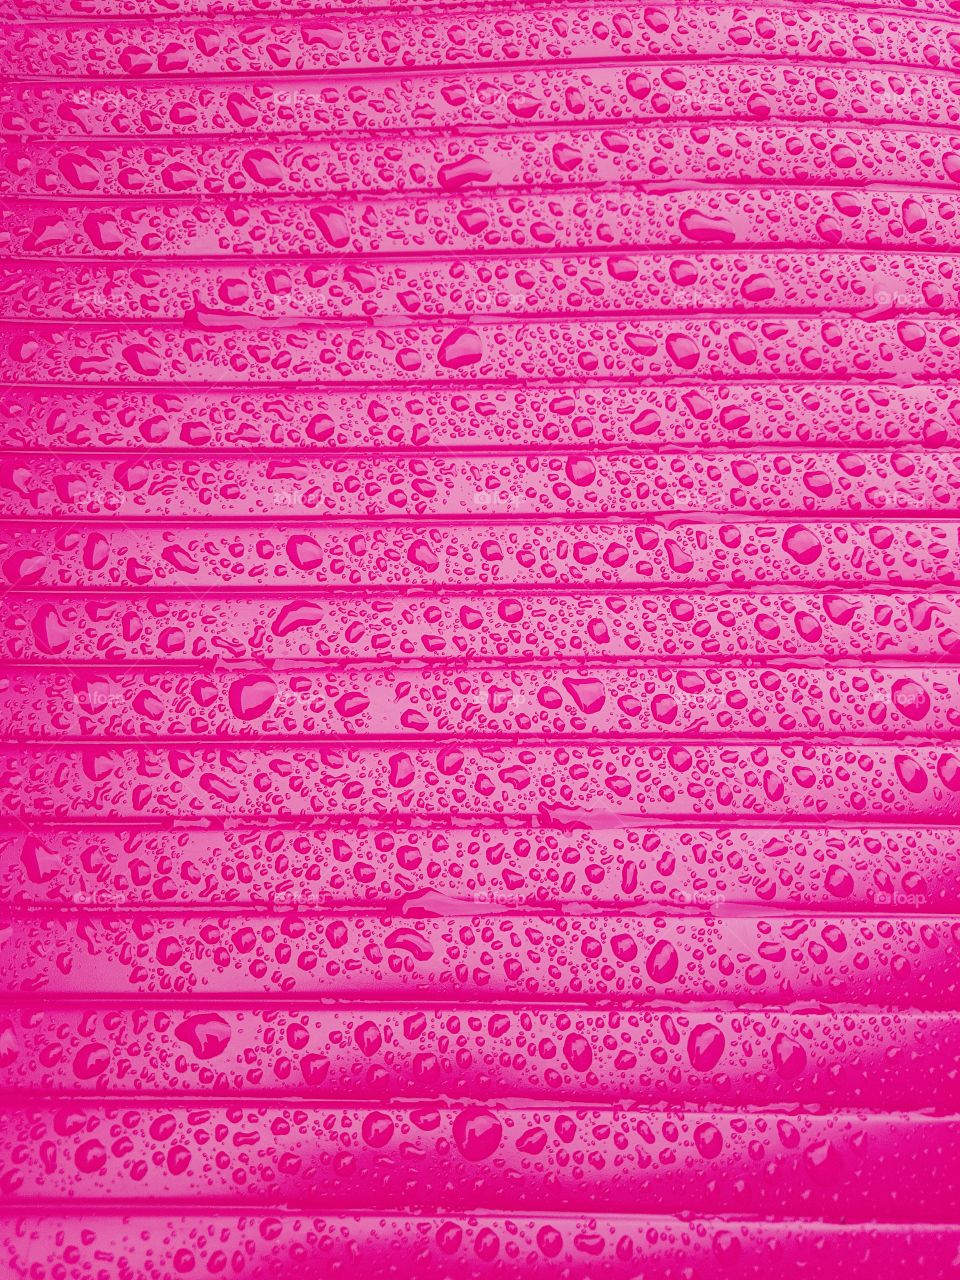 Close up of water droplets on a wet shiny plastic surface pink with horizontale lines parallele